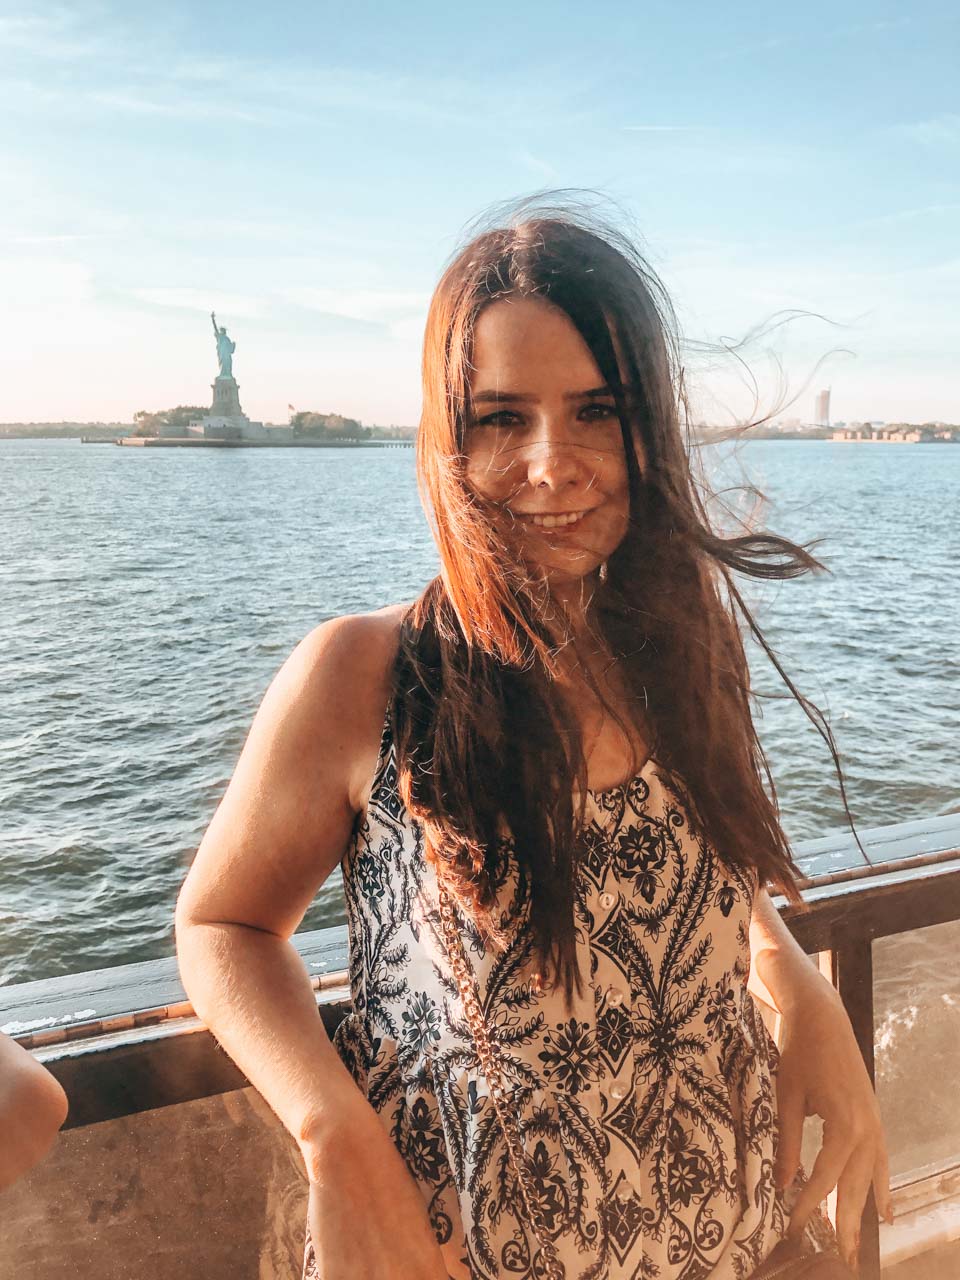 A girl standing on board of the Staten Island ferry with the Statue of Liberty in the background